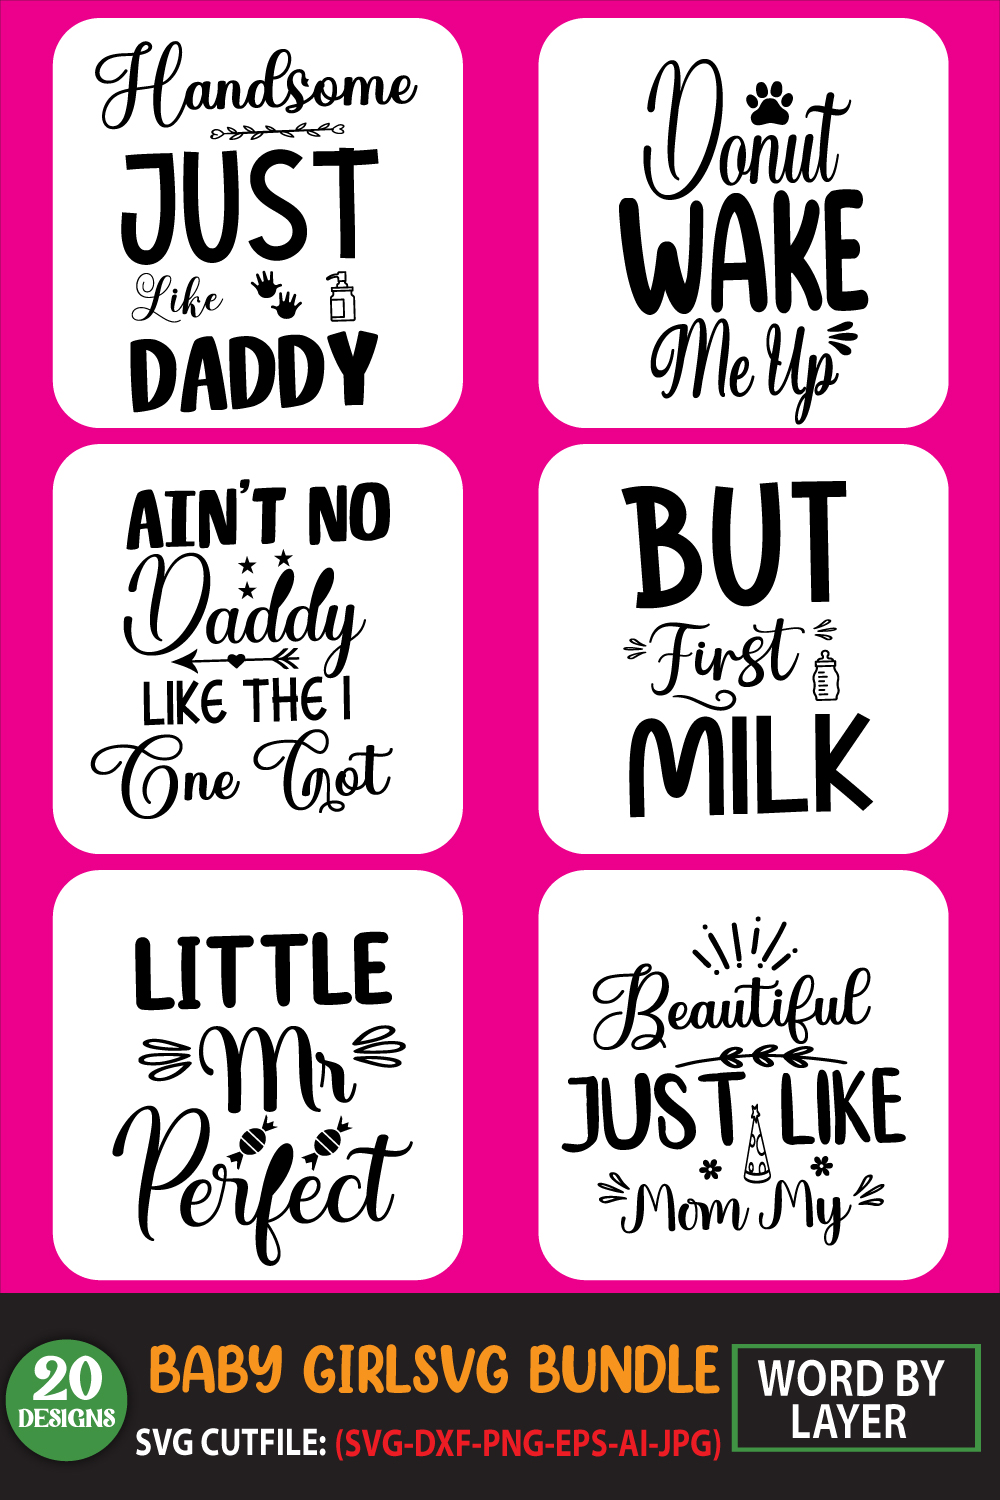 A pack of beautiful images for prints on the theme of a baby girl